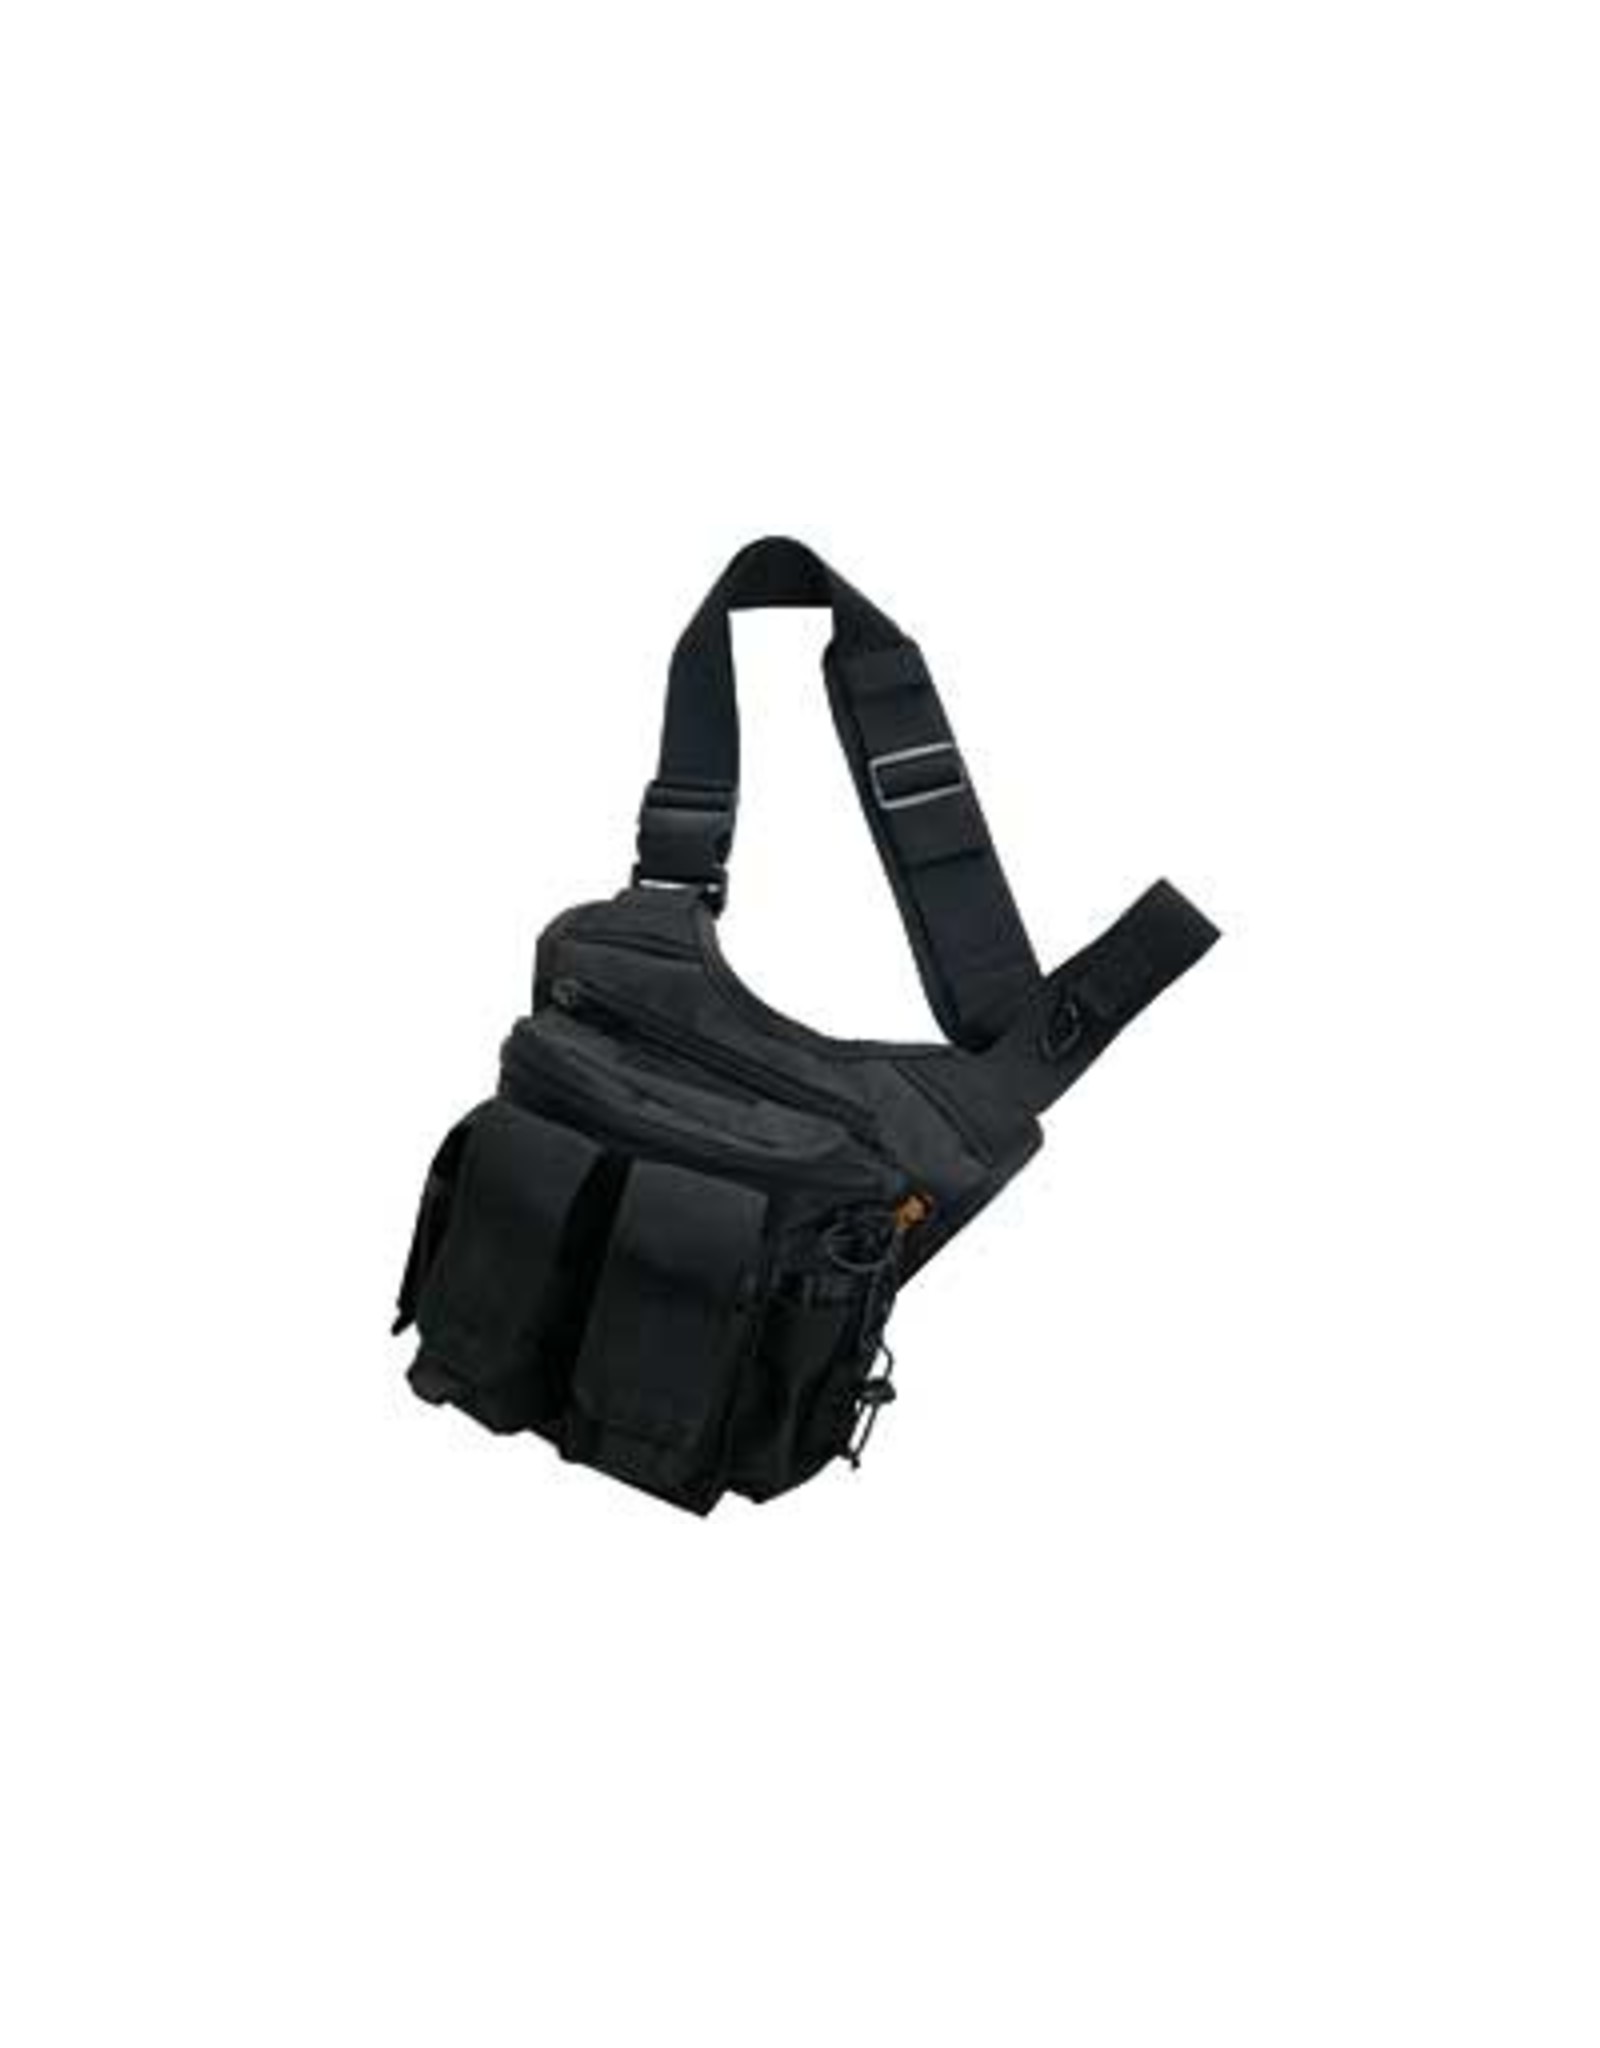 OUS PEACE KEEPER OUS RAPID DEPLOYMENT PACK BLACK